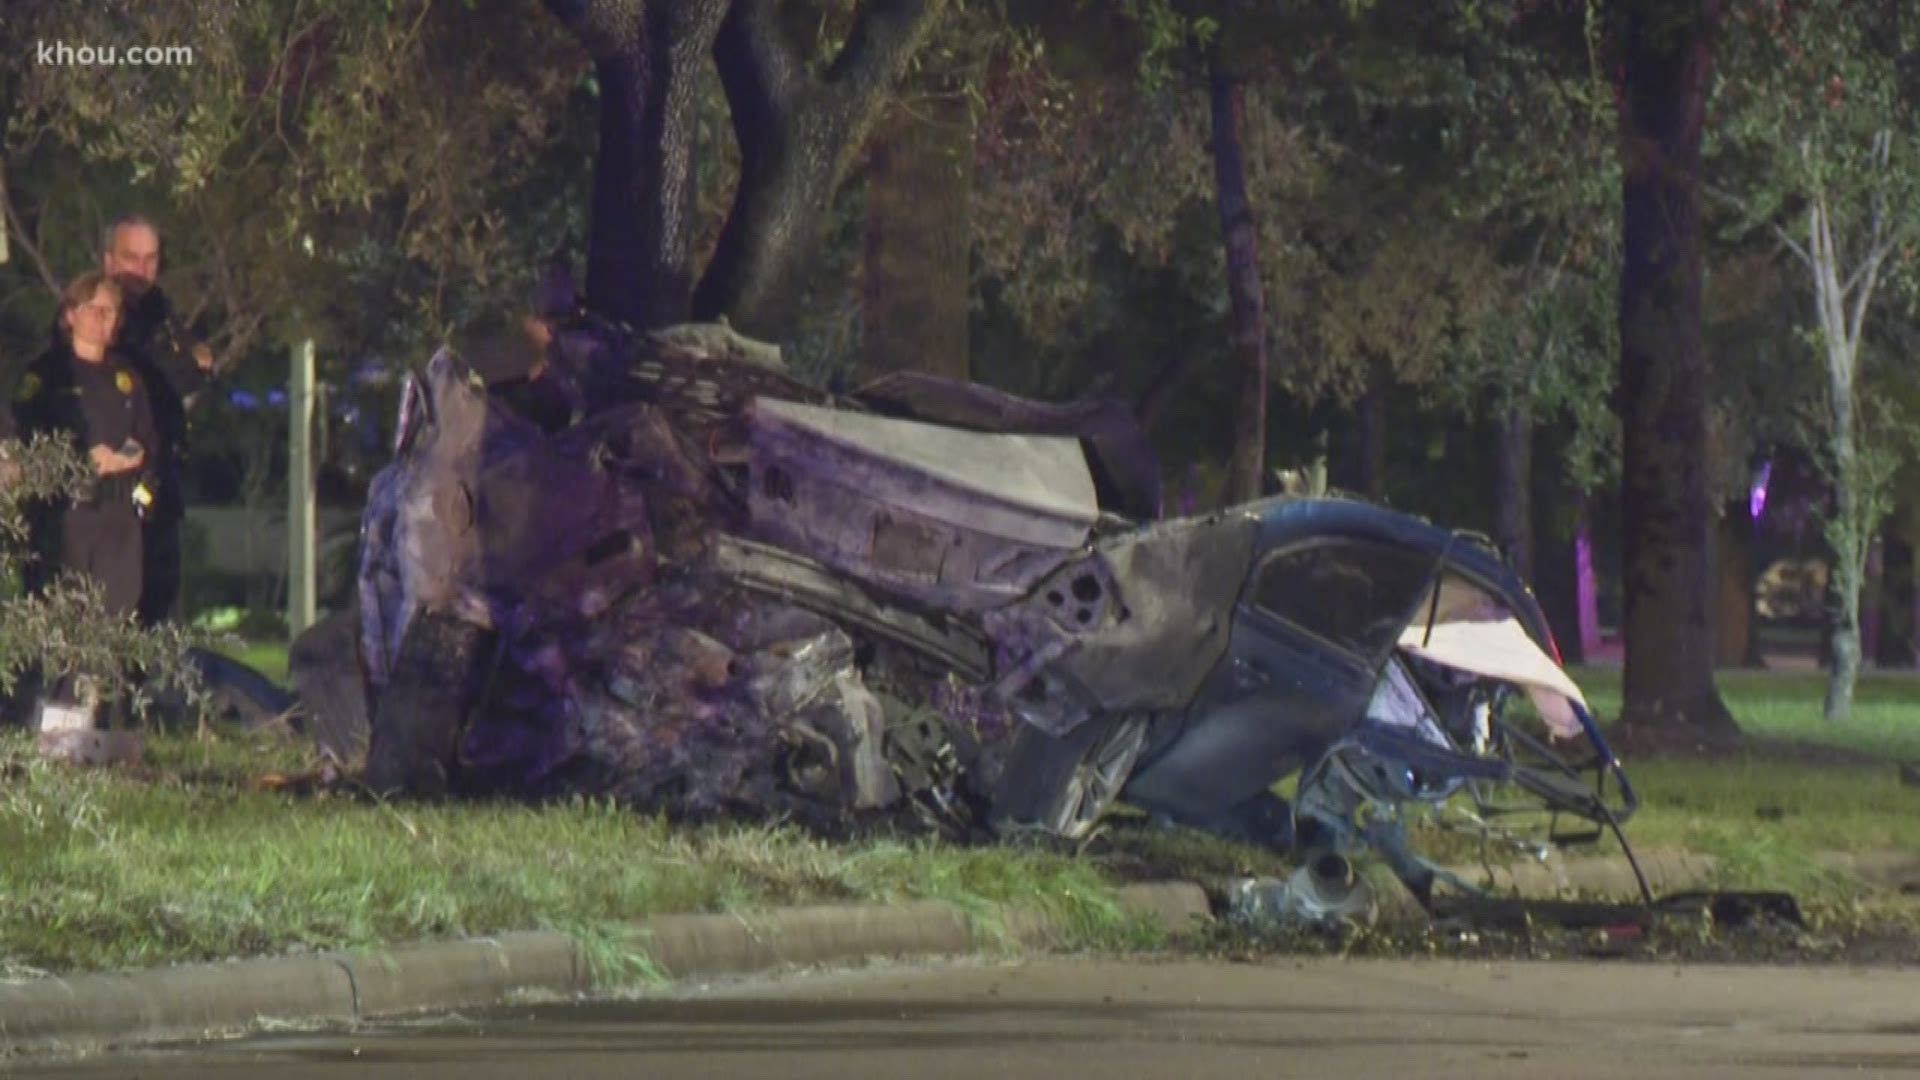 Houston police said one person is dead after a car slammed into a tree in Meyerland. The car nearly split in half. Police believe the driver may have been racing.